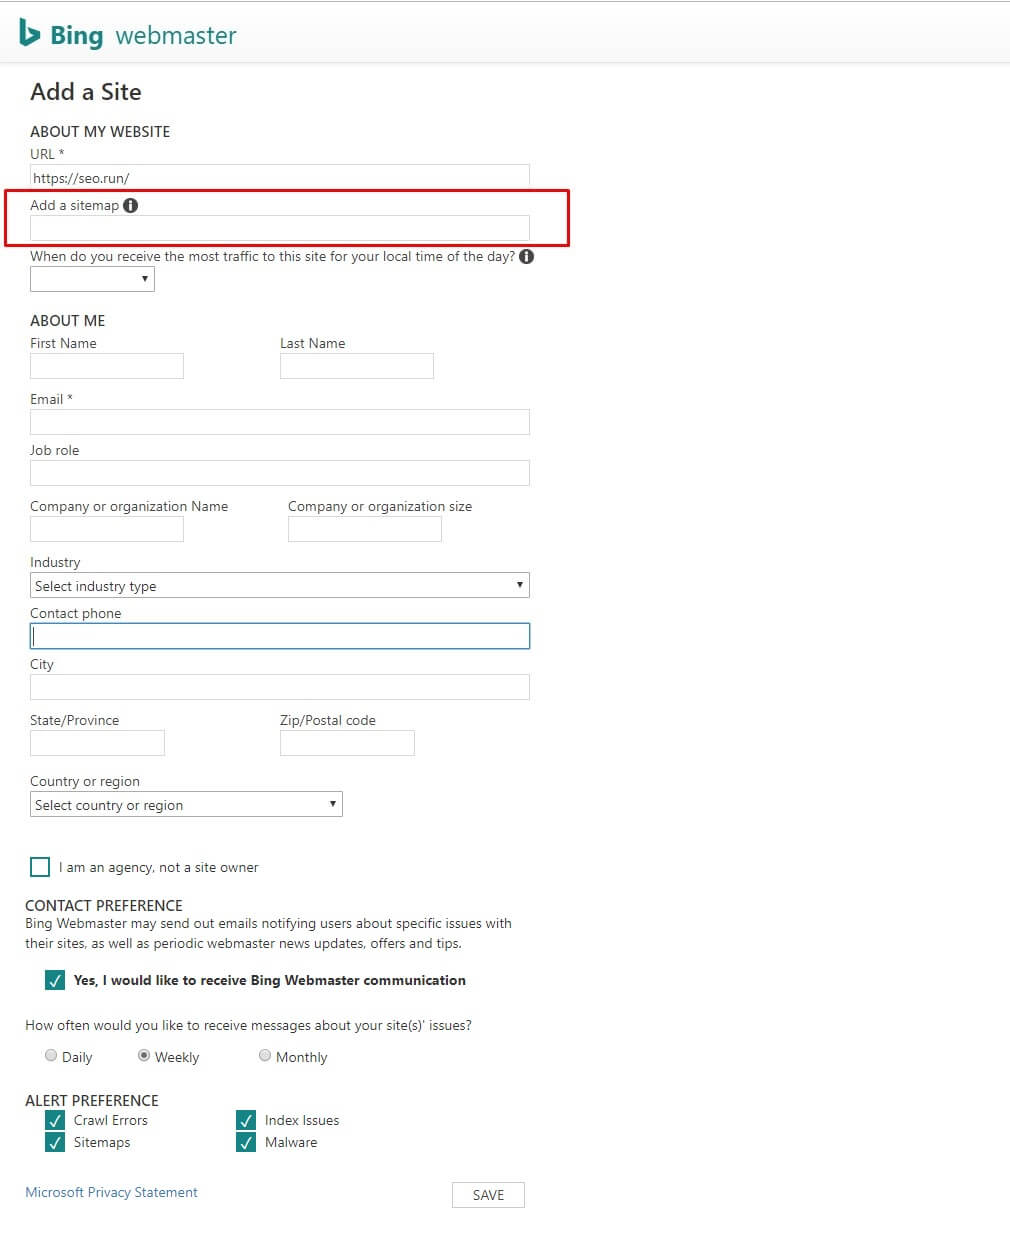 Add a sitemap in the Bing Webmaster Tool